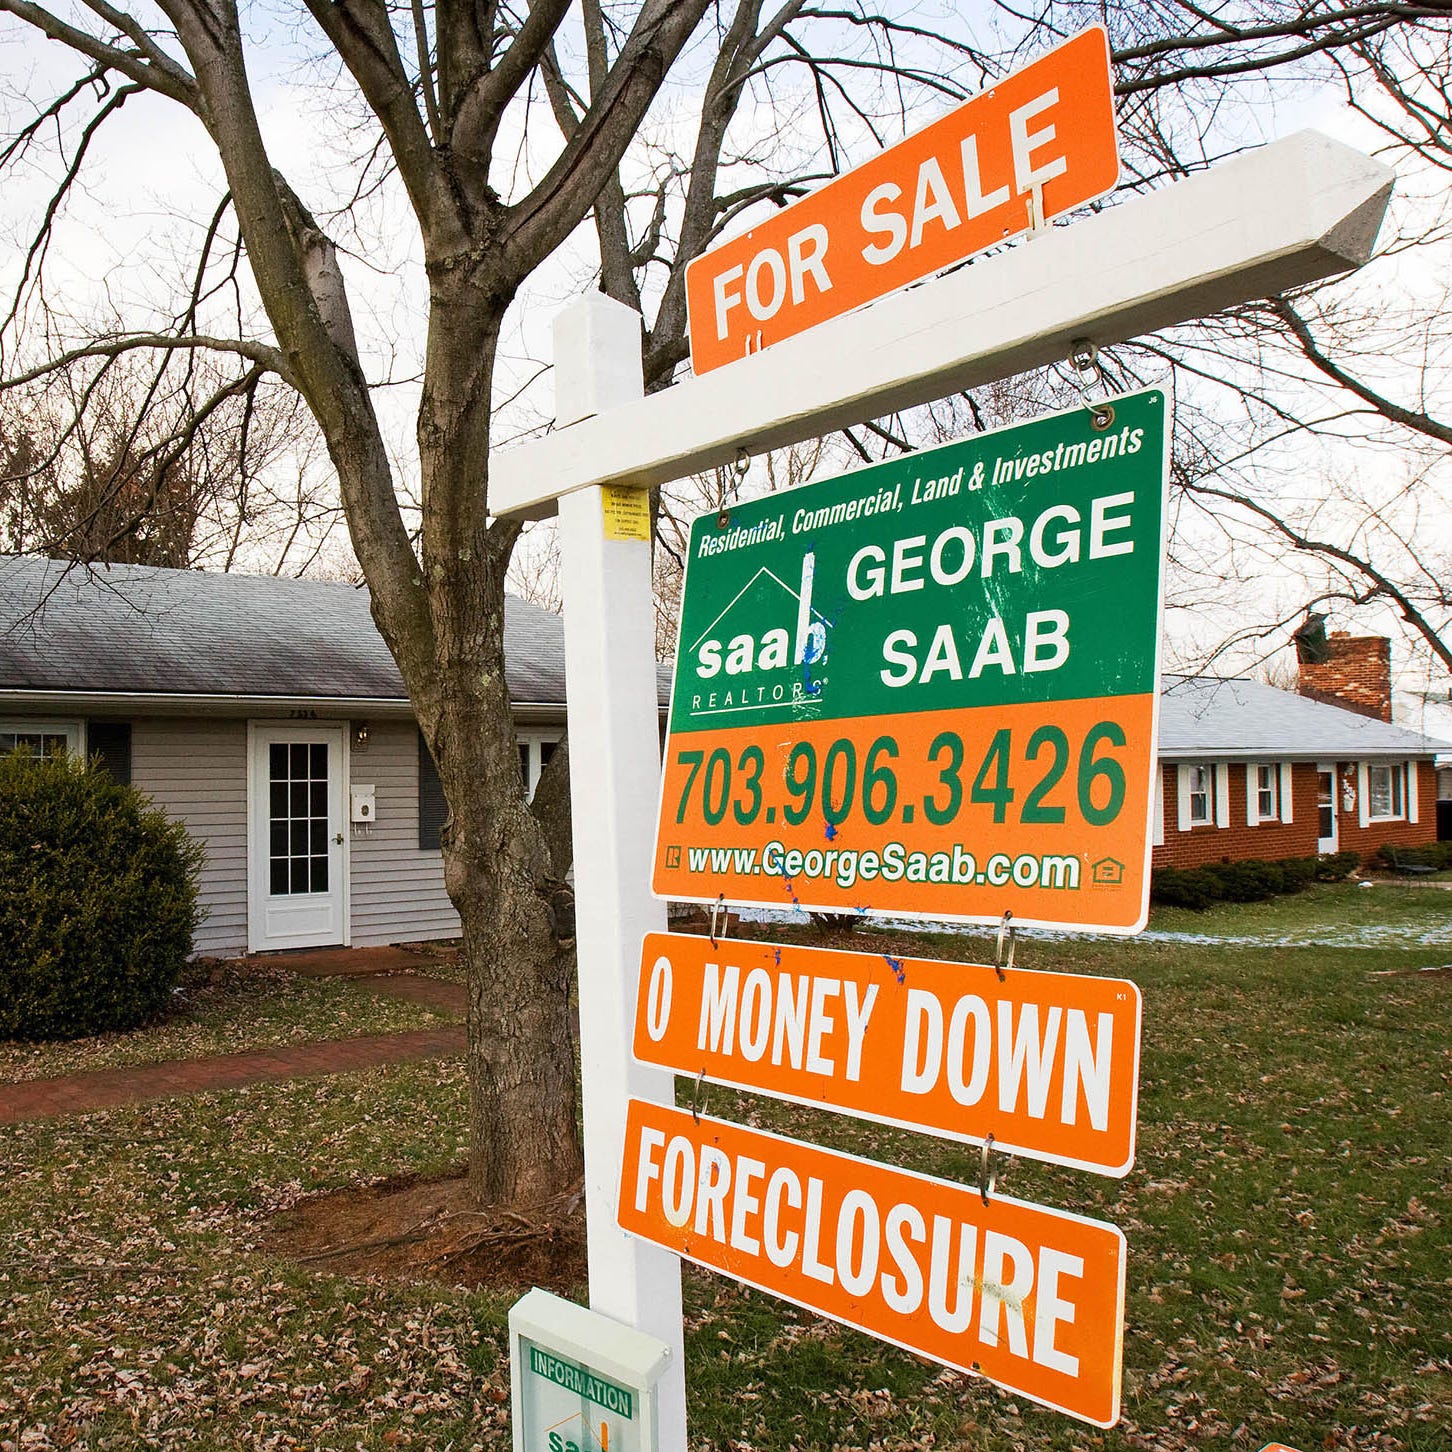 A home for sale is seen January 24, 2008 in Manassas, Virginia. The mortgage crisis has created a new industry for developers buying foreclosed or auctioned homes at cheap prices, then reselling them for a profit.  